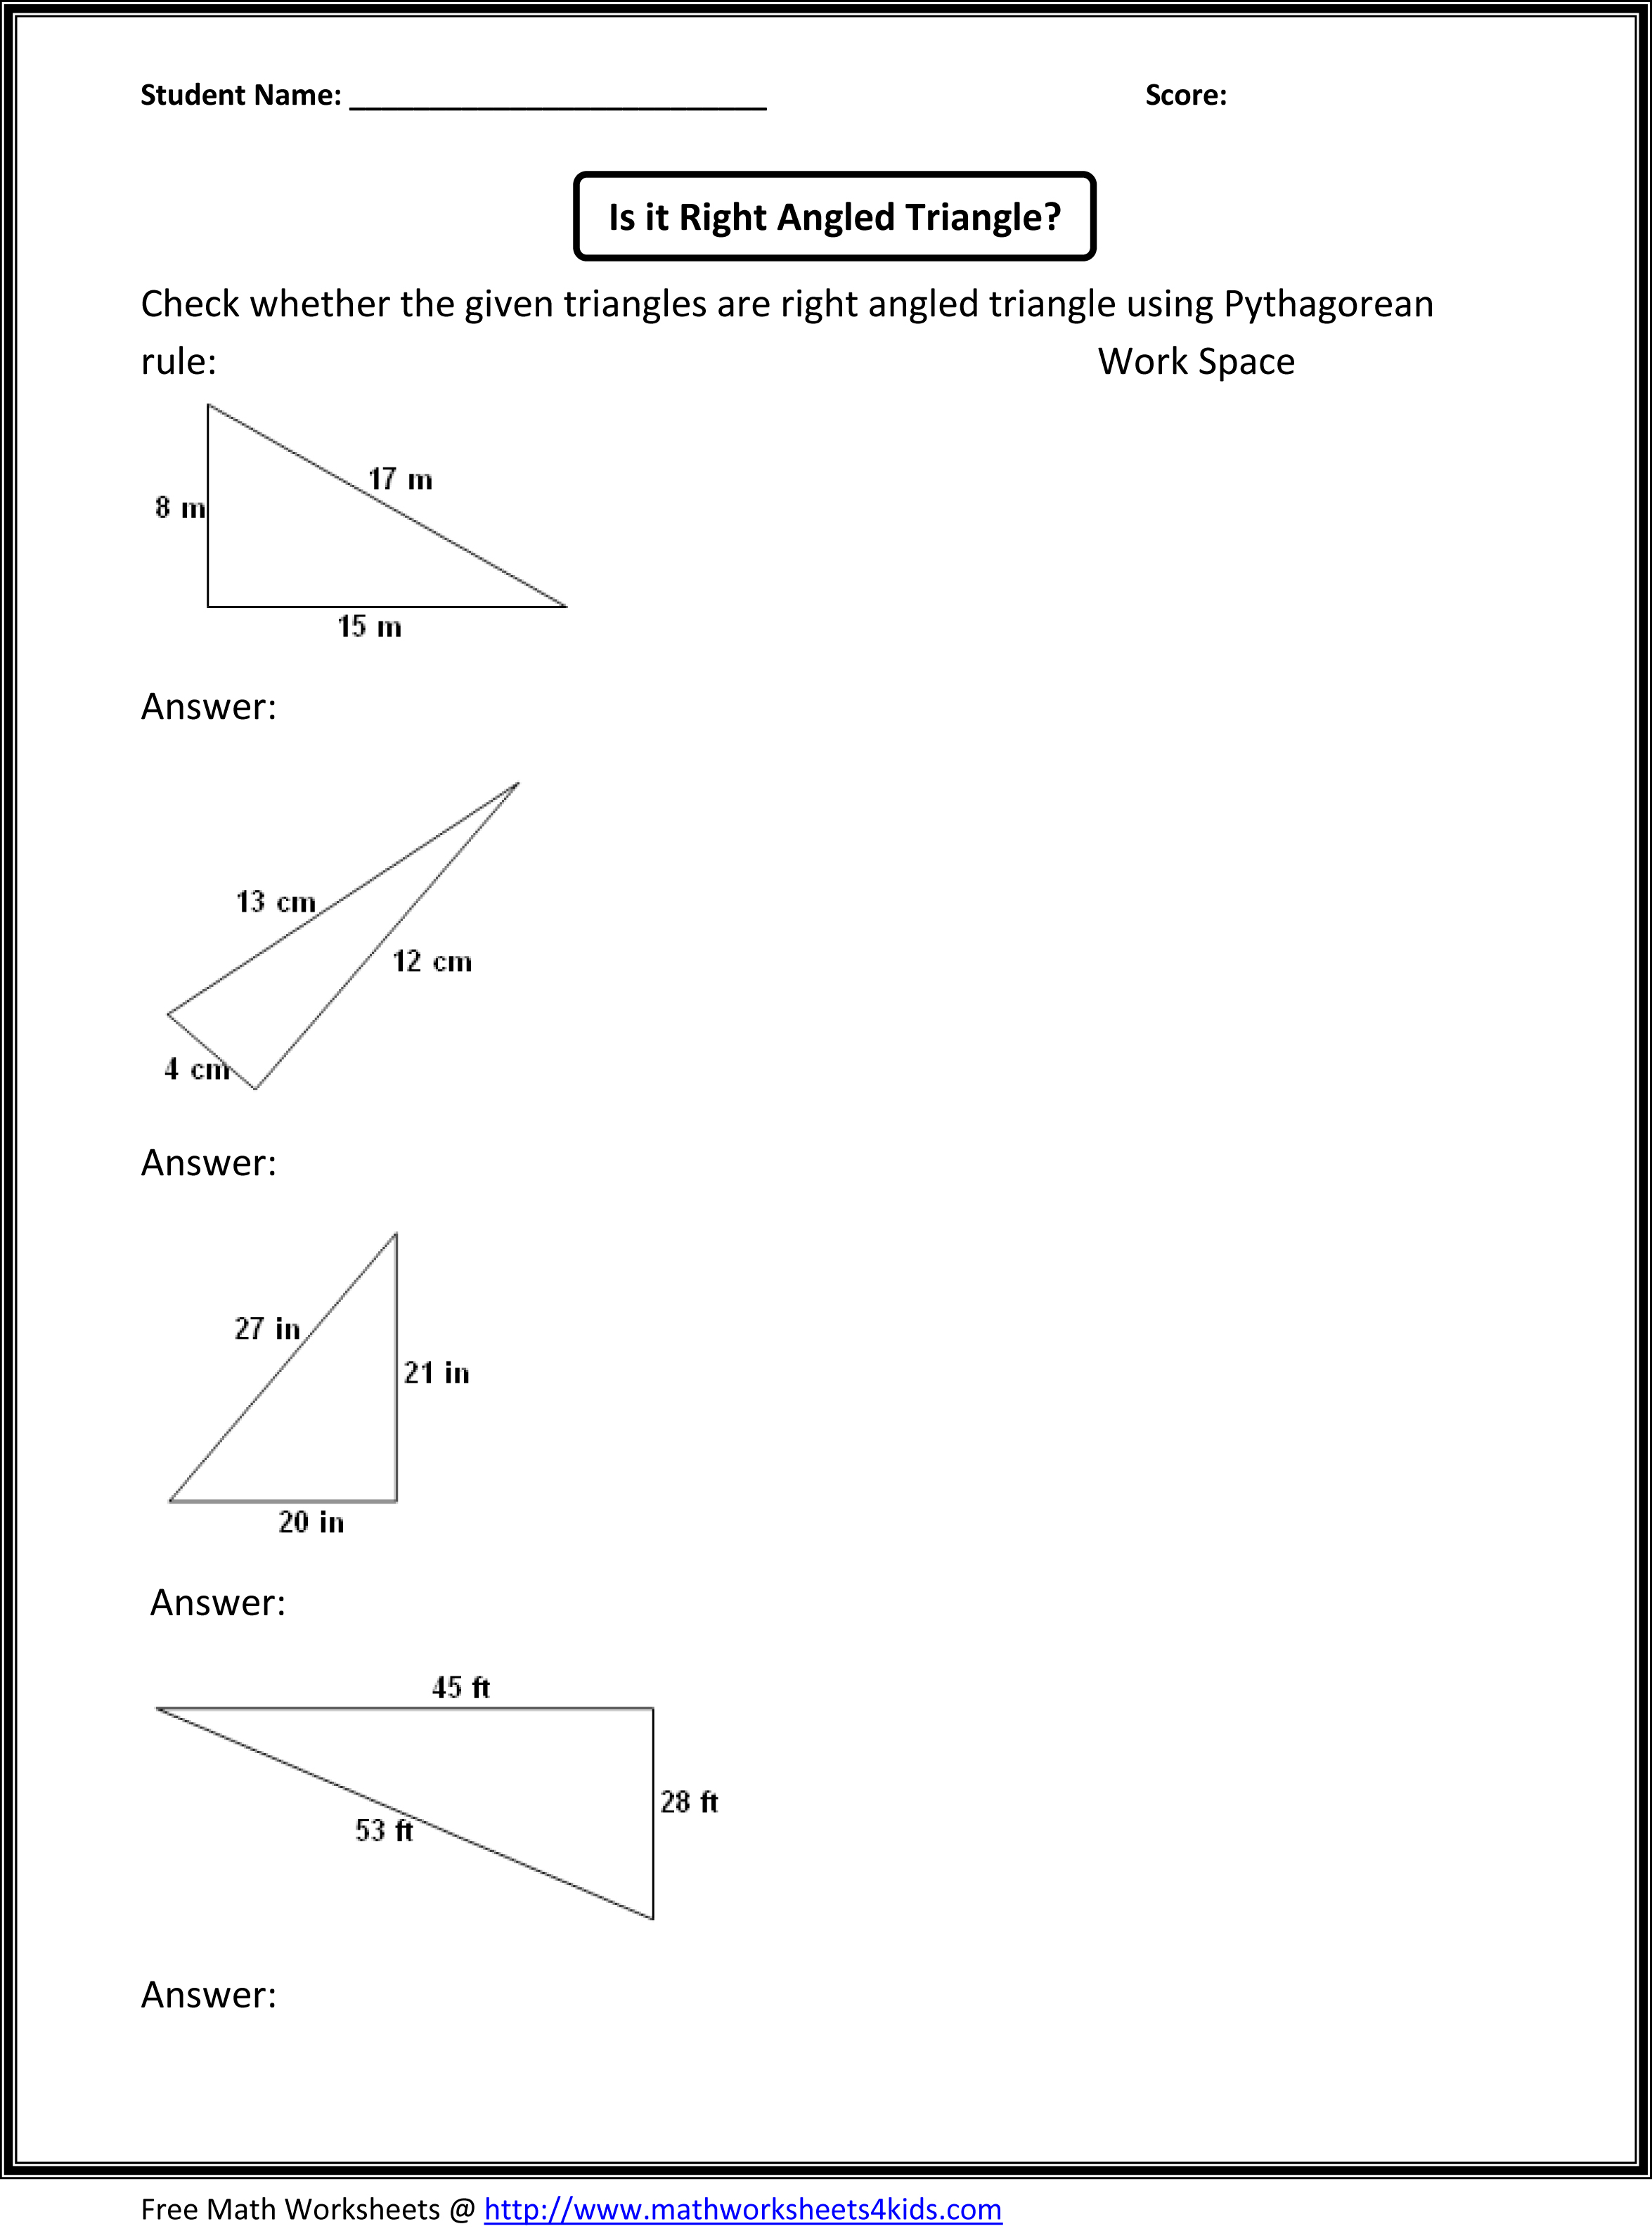 19 Best Images of Scientific Method Story Worksheet Answer Key - 8th